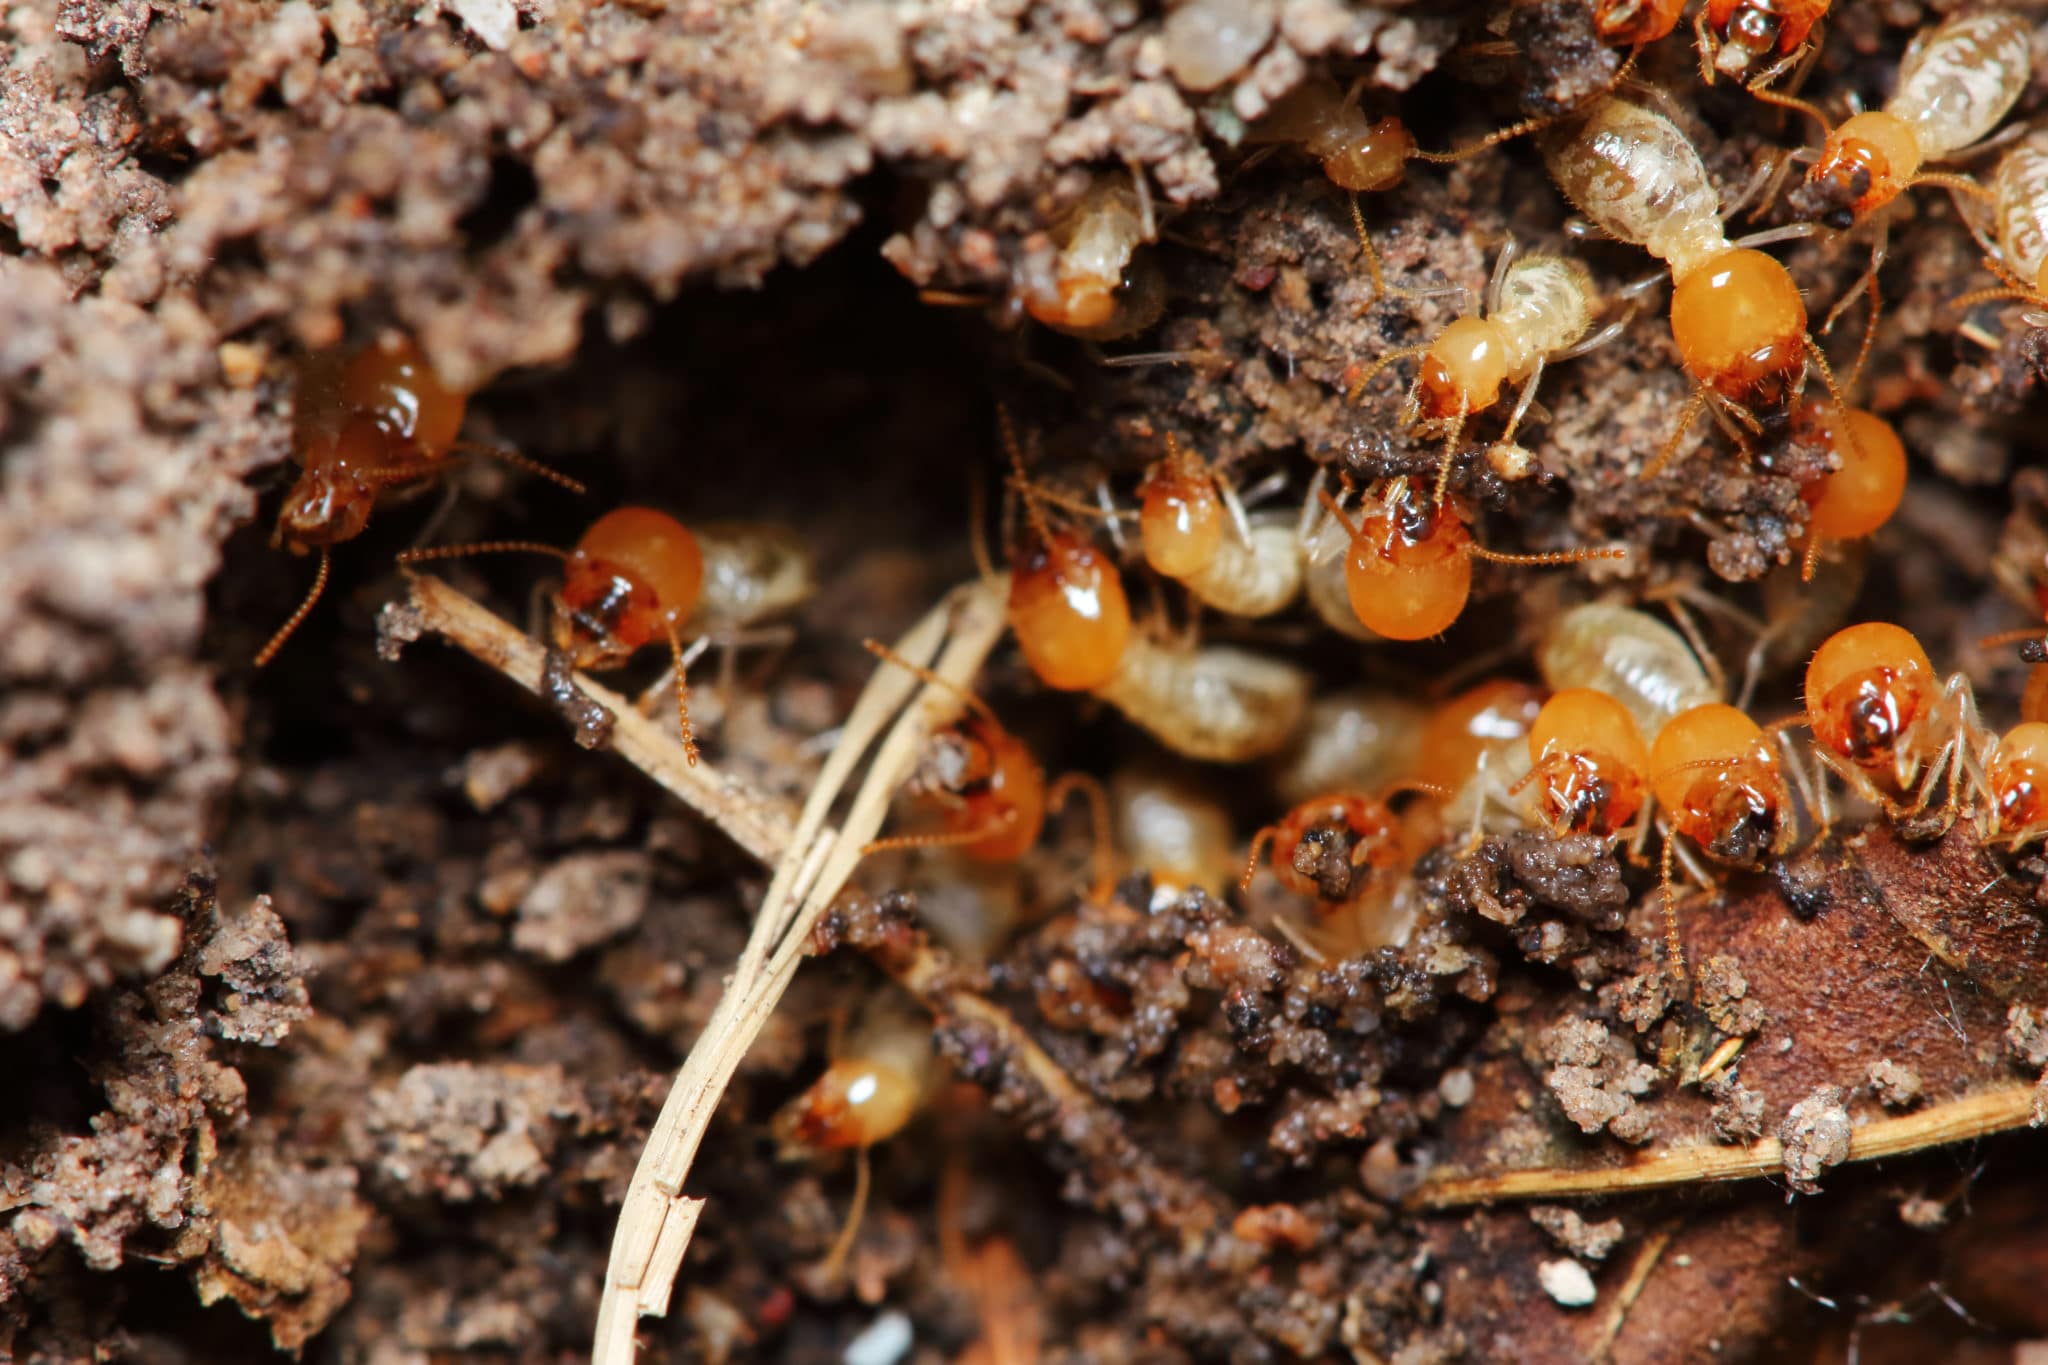 Can Termites Damage Your Home in Winter?